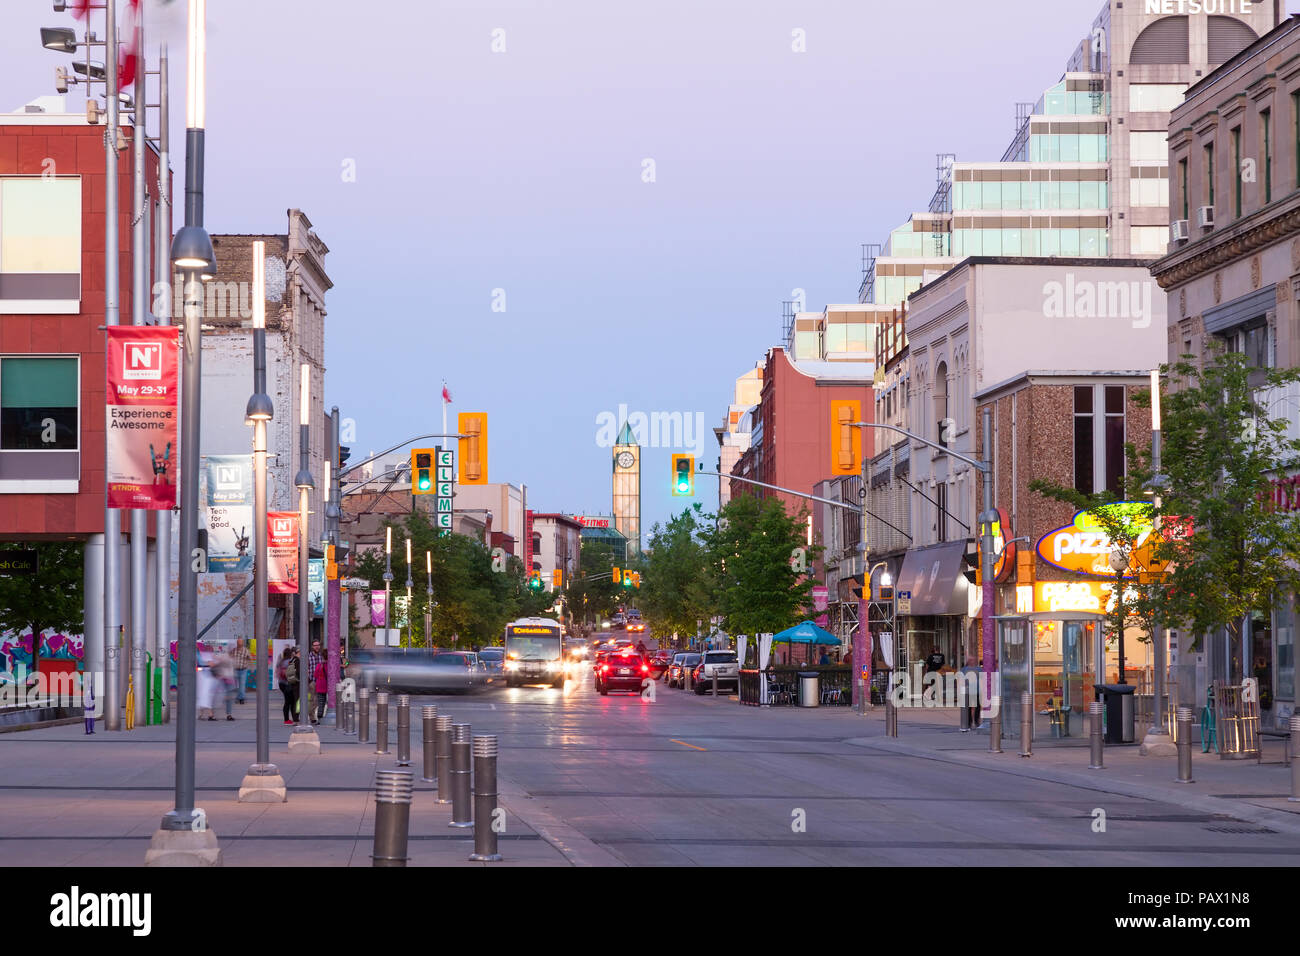 King Street West At Dusk In Downtown Kitchener Ontario Canada PAX1N8 